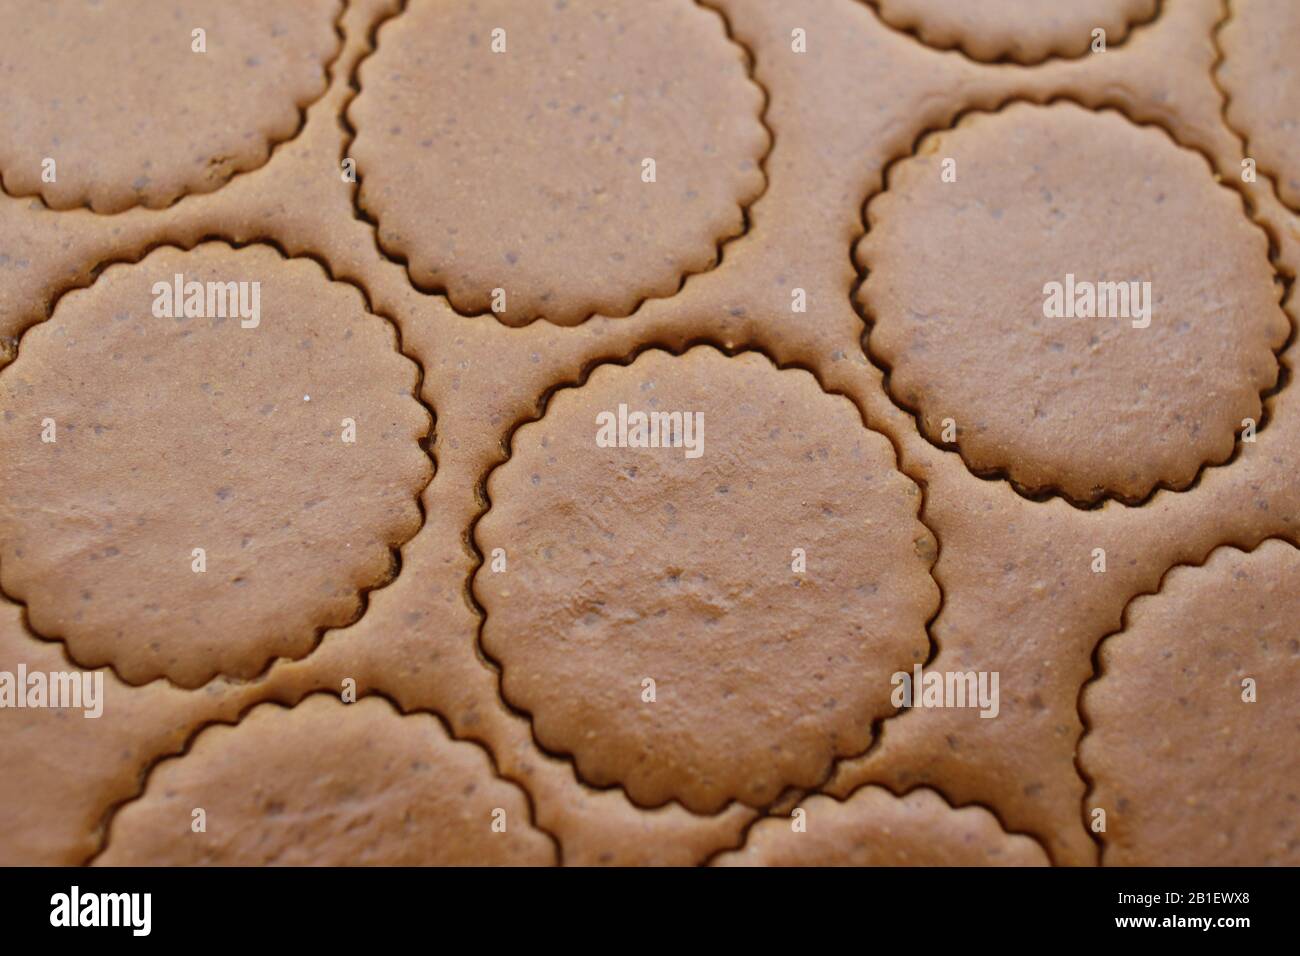 Cookie dough with round cut outs, close-up. Making homemade cookies Stock Photo